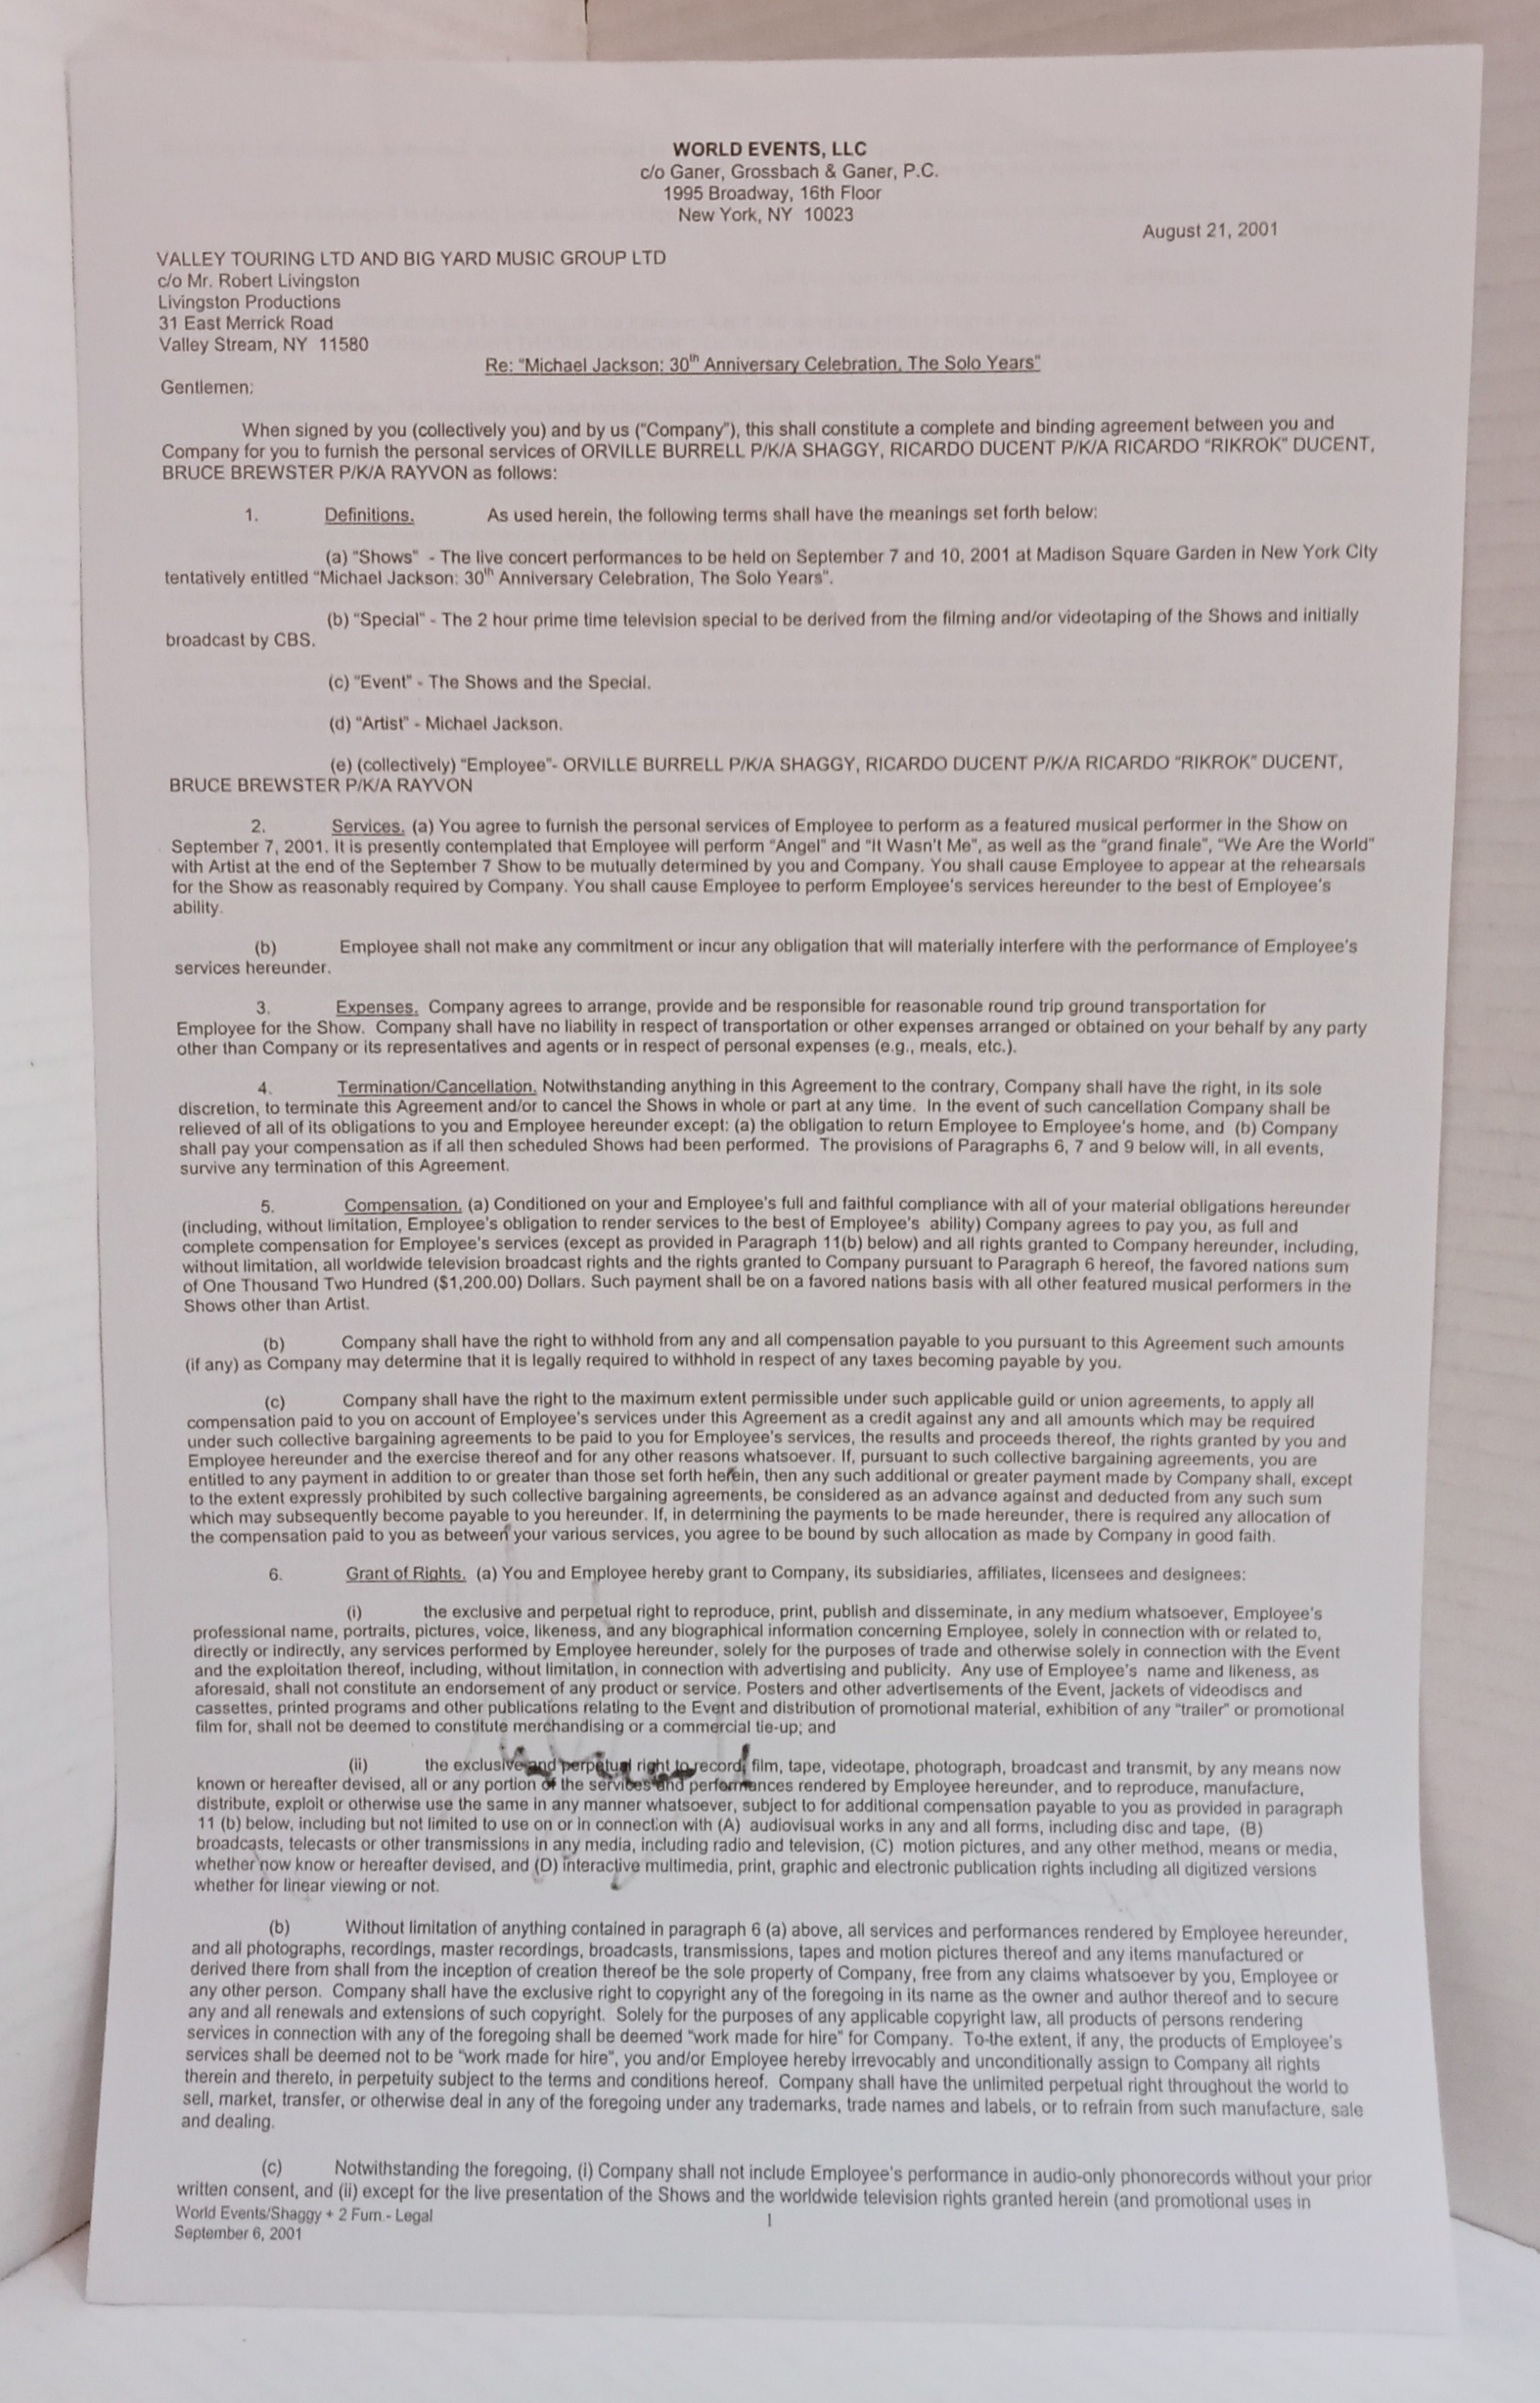 Contract for Michael Jackson 30th Anniversary Celebration The Solo Years, dated August 21st 2001